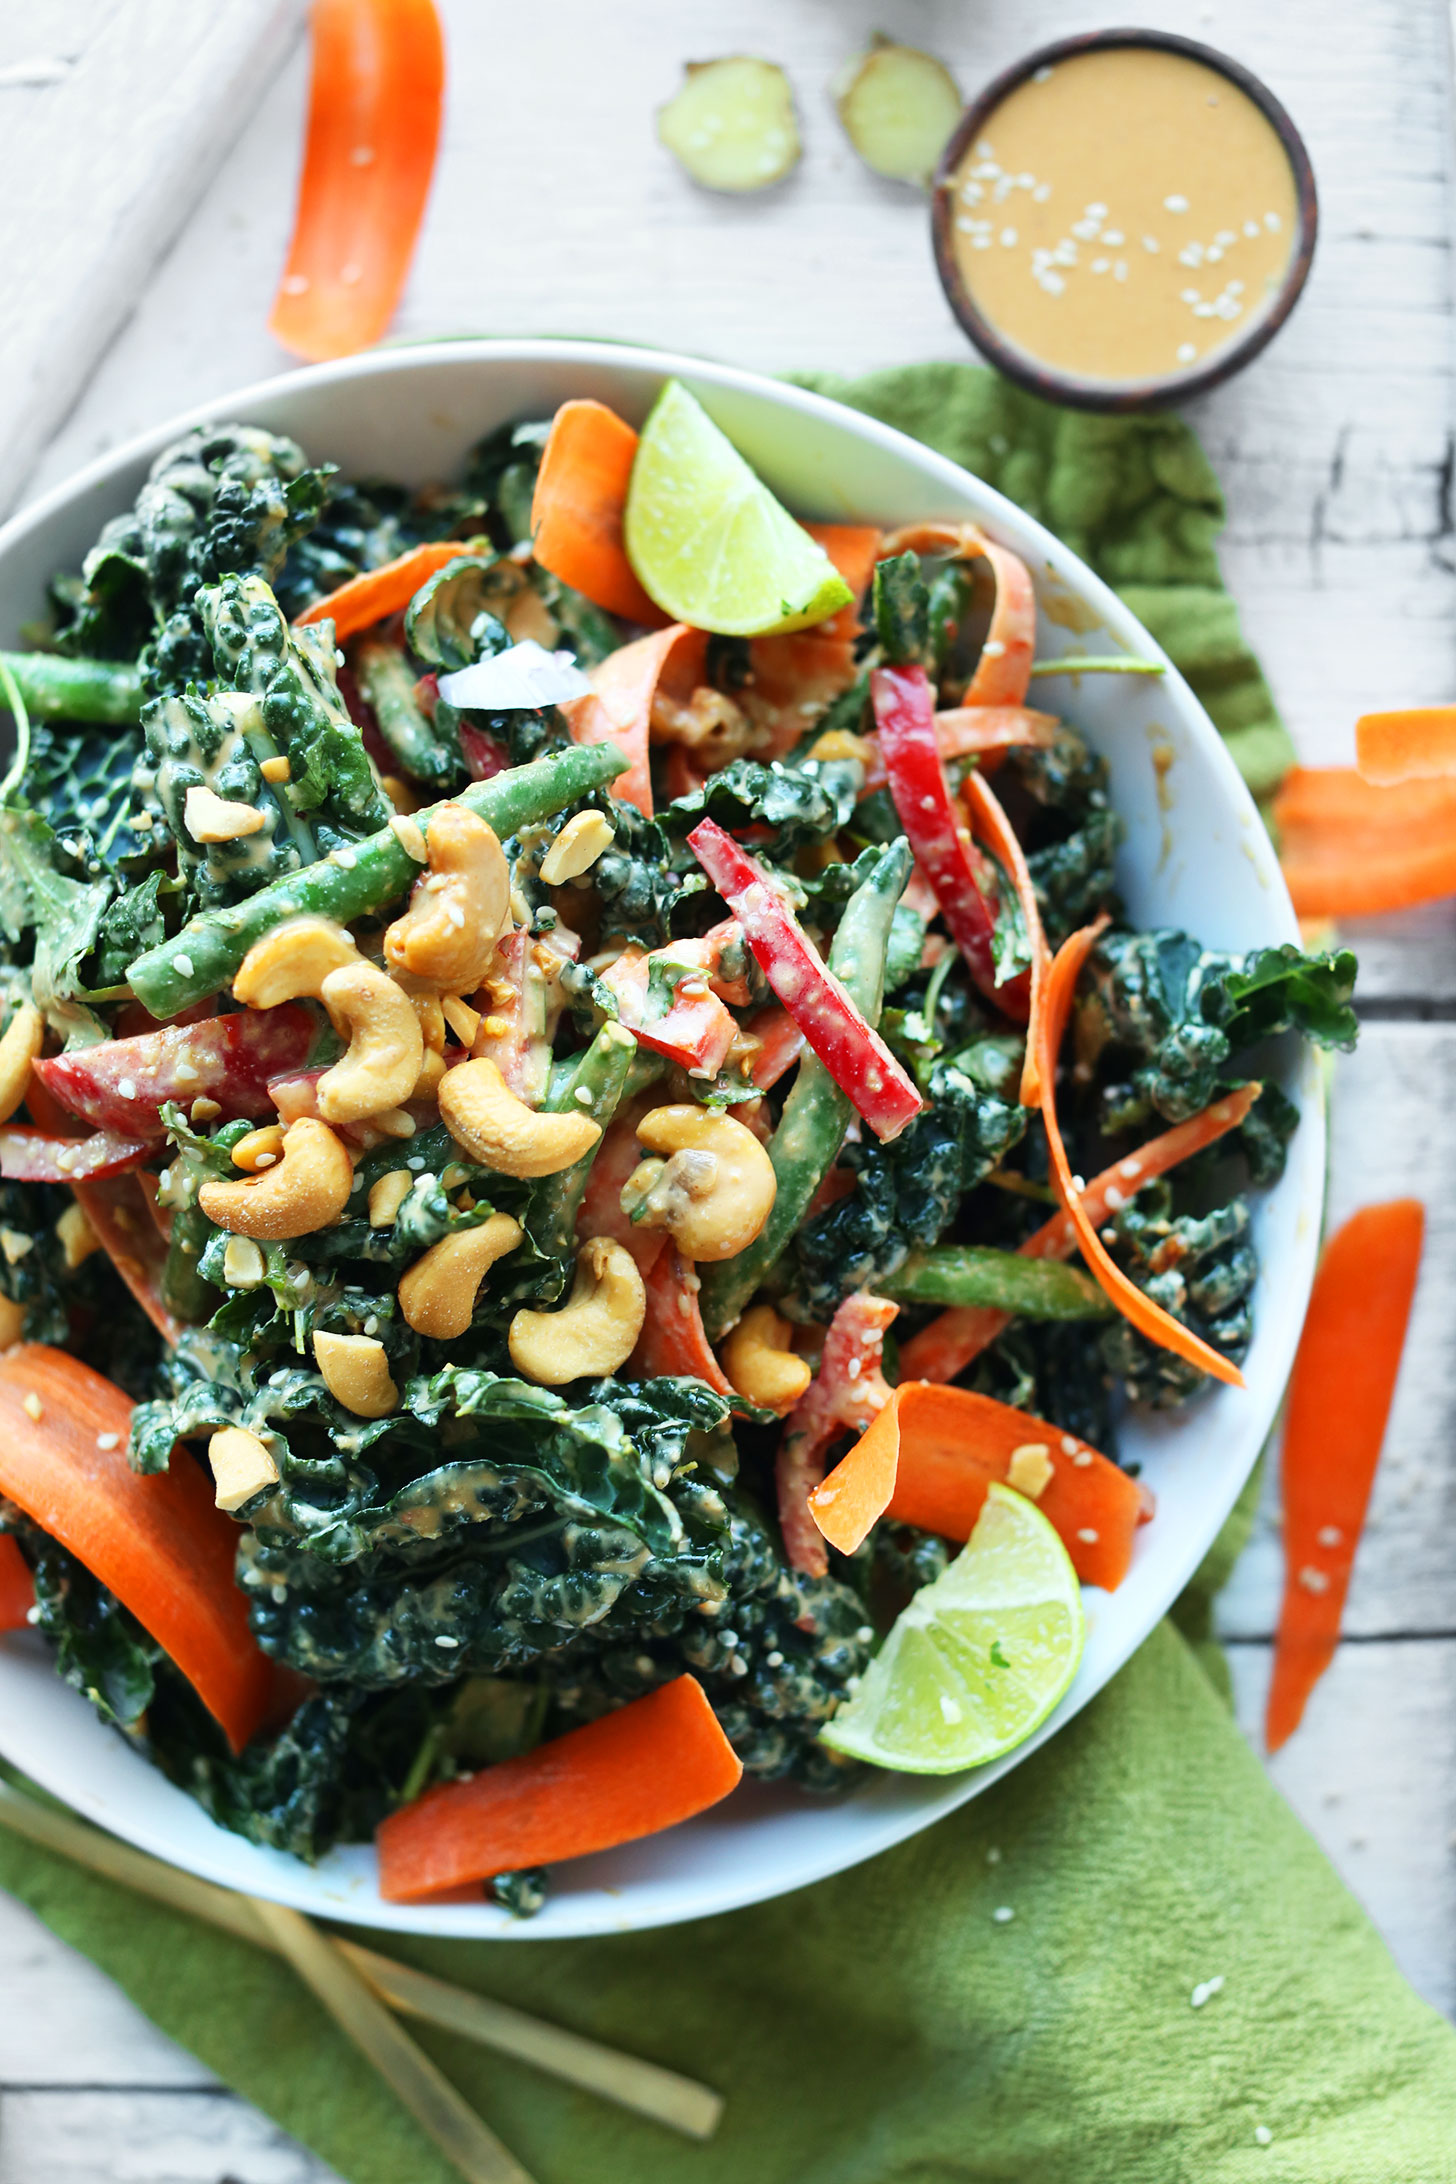 Bowl of Ginger Thai Kale Salad with Cashew Dressing for a healthy vegan meal